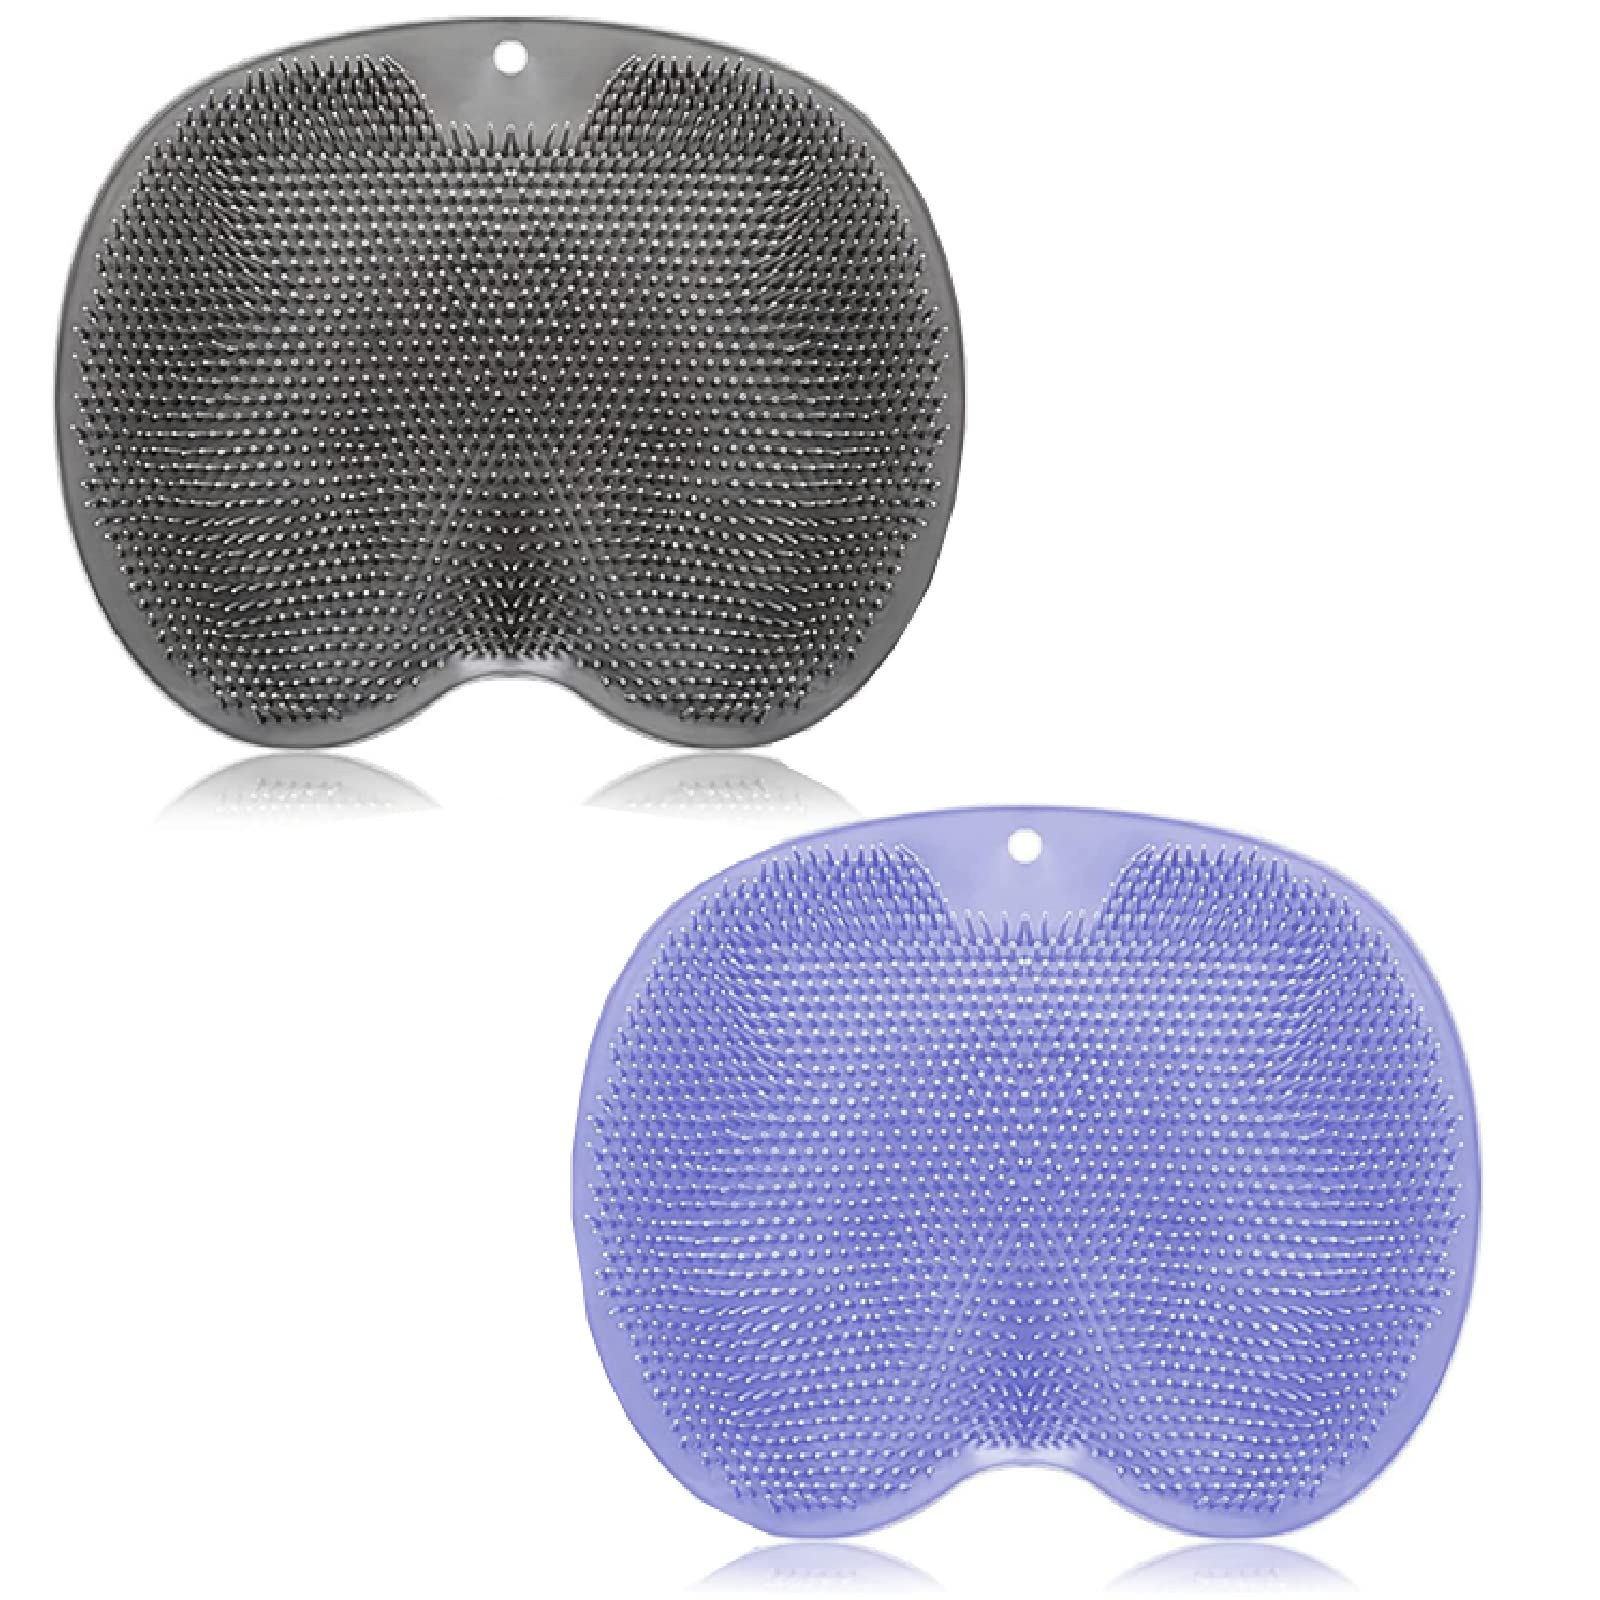 2 Pieces Shower Foot Scrubber Mat Hands Free Back Scrubber for Shower Wall Mounted Bath Massage Pad Back Scrubber Back with Non Slip Suction Cups Foot Cleaner for Men Women (Gray, Blue)